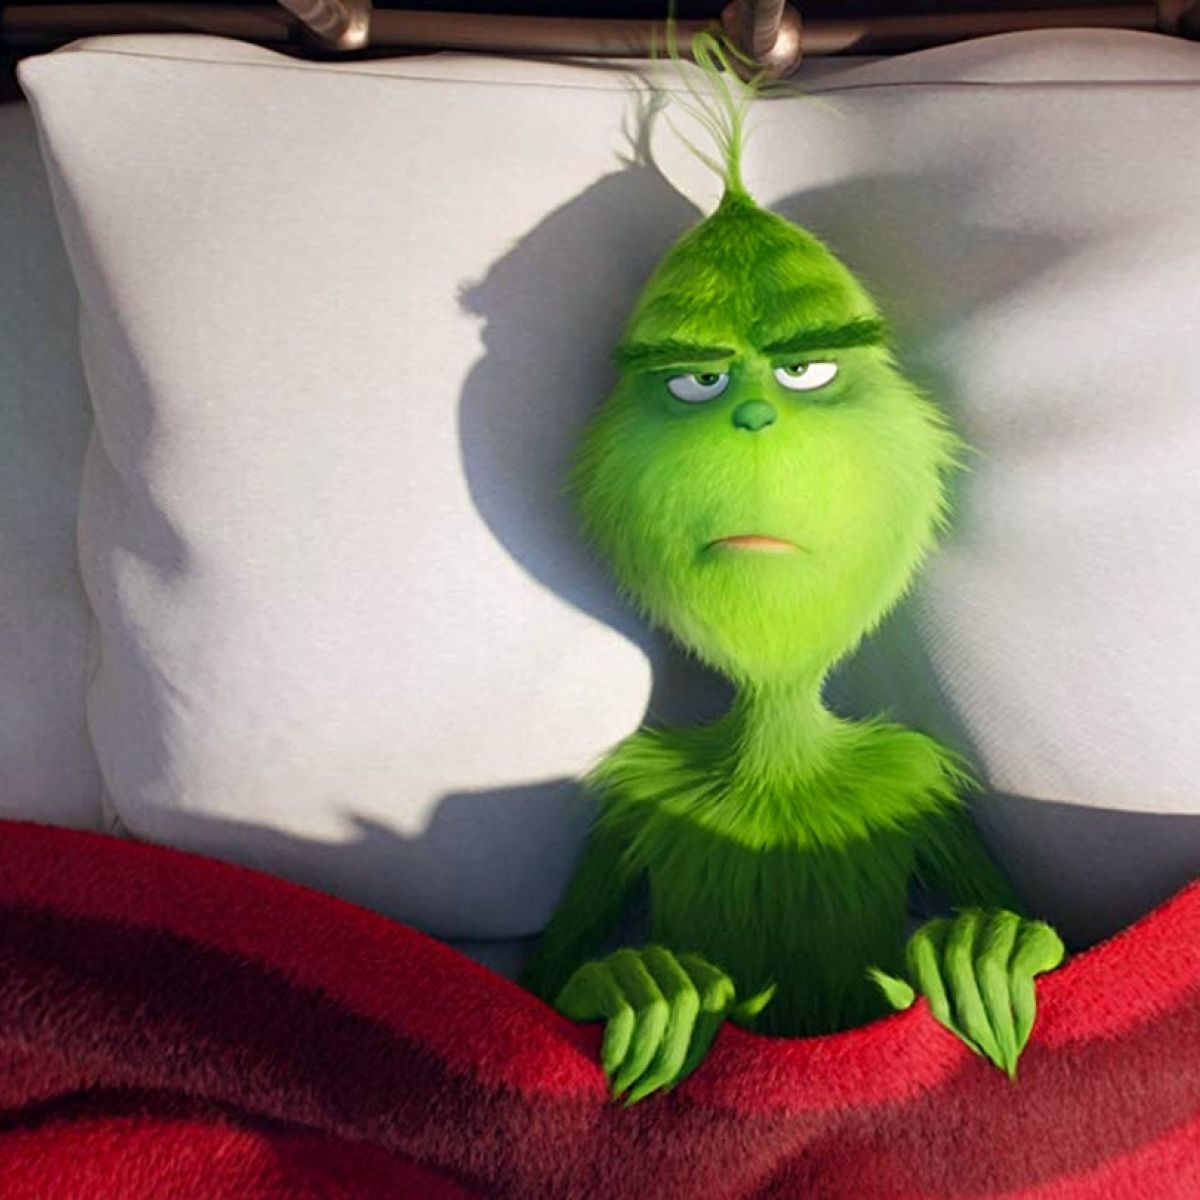 Grinch Stole Christmas Cartoon Porn - The Grinch, as voiced by Benedict Cumberbatch, is too nice